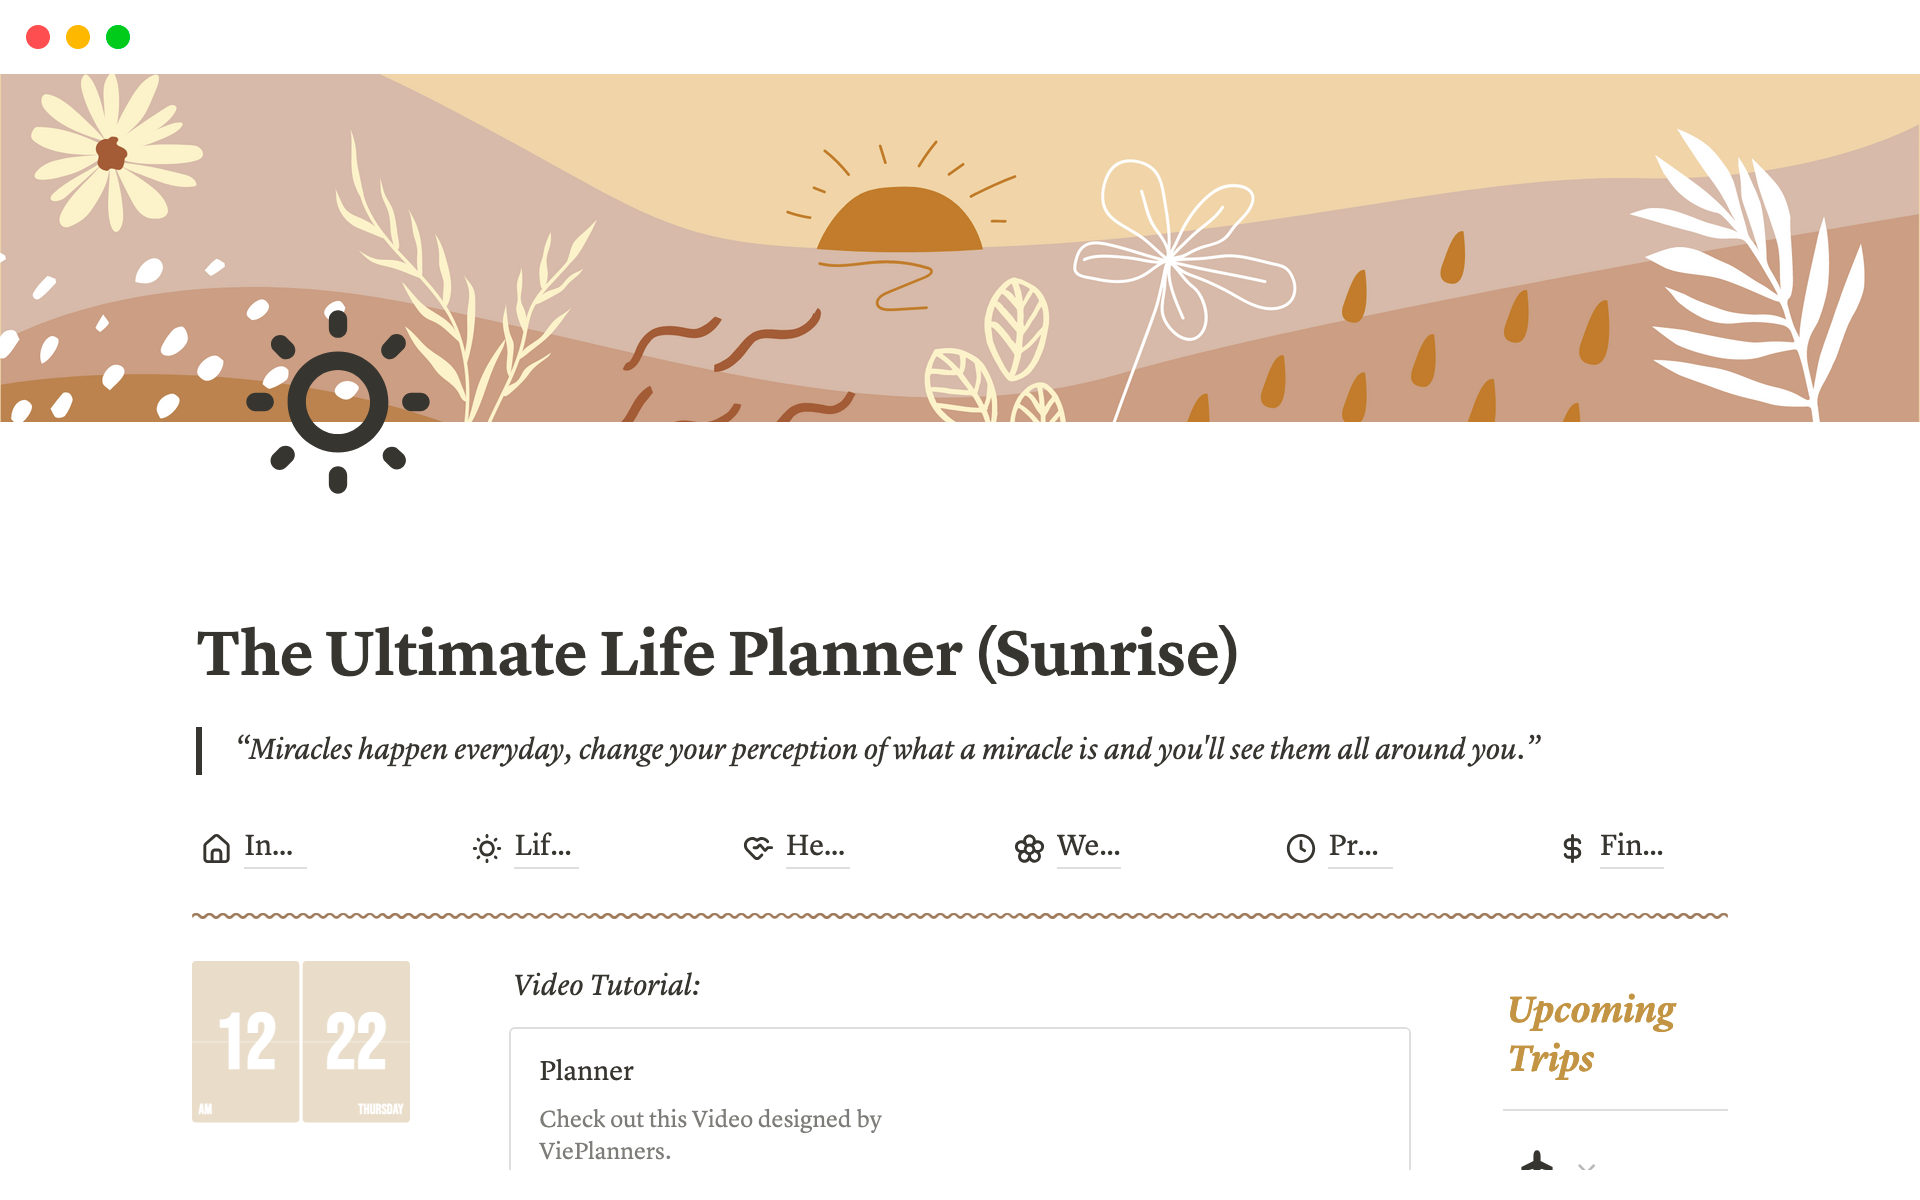 The Ultimate Life Planner serves as a comprehensive tool to effectively plan, organize, and monitor all aspects of your life.